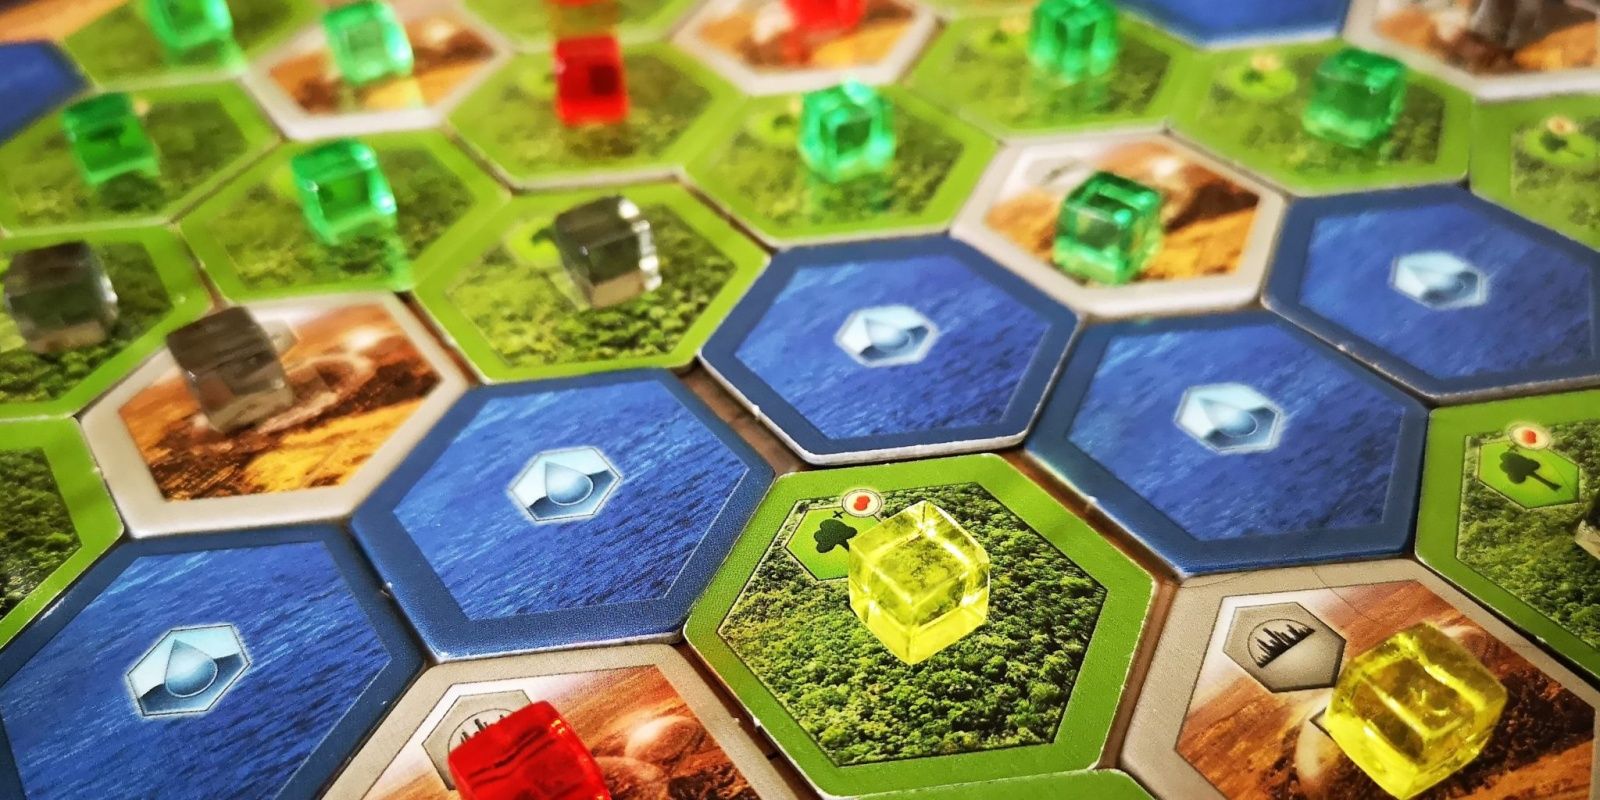 Pieces from several players on areas in Terraforming Mars board game